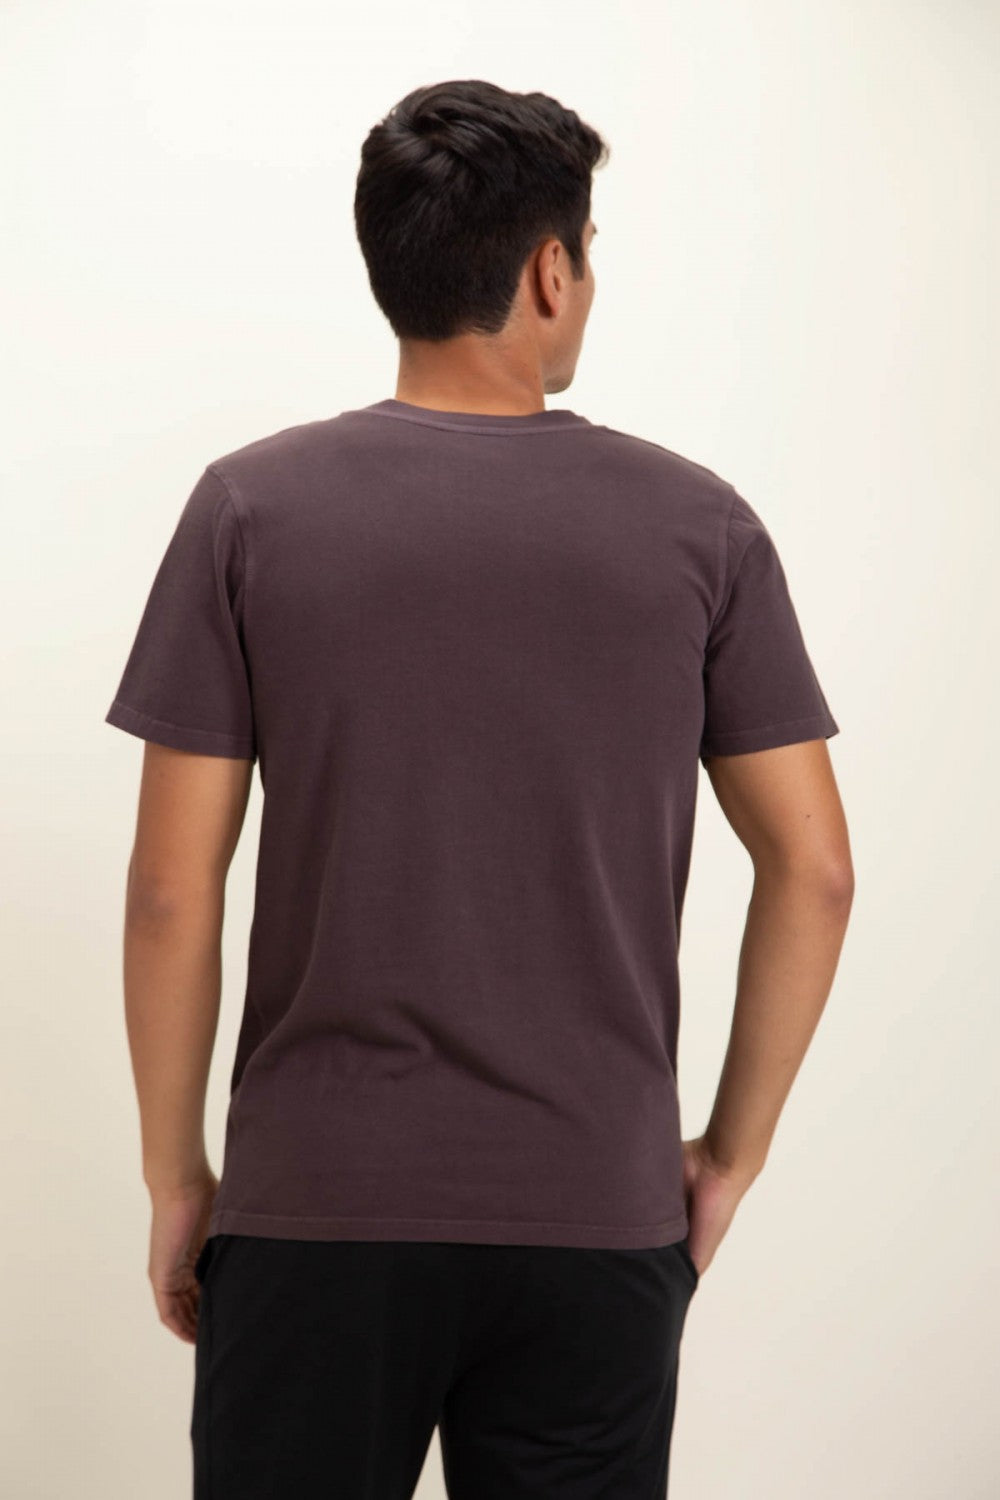 Stretchy and breathable (thanks to the pima cotton and spandex fibers), this t-shirt also features a round neckline, short sleeves, and topstitch across the neckline and the armhole.